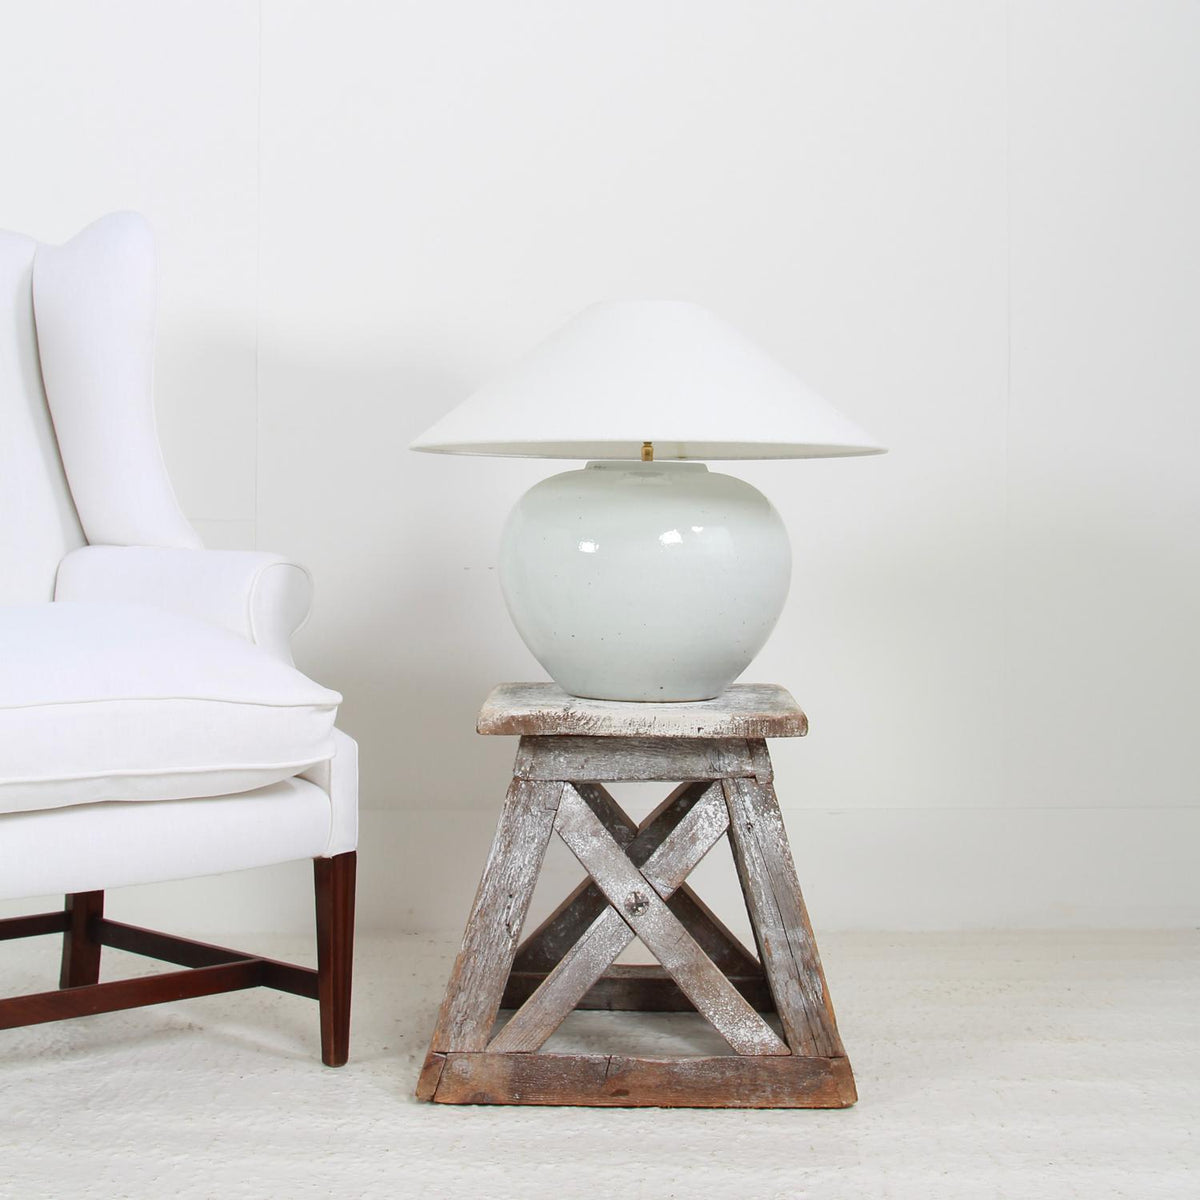 CONTEMPORARY WHITE GLAZED CERAMIC POT LAMP WITH LINEN SHADE